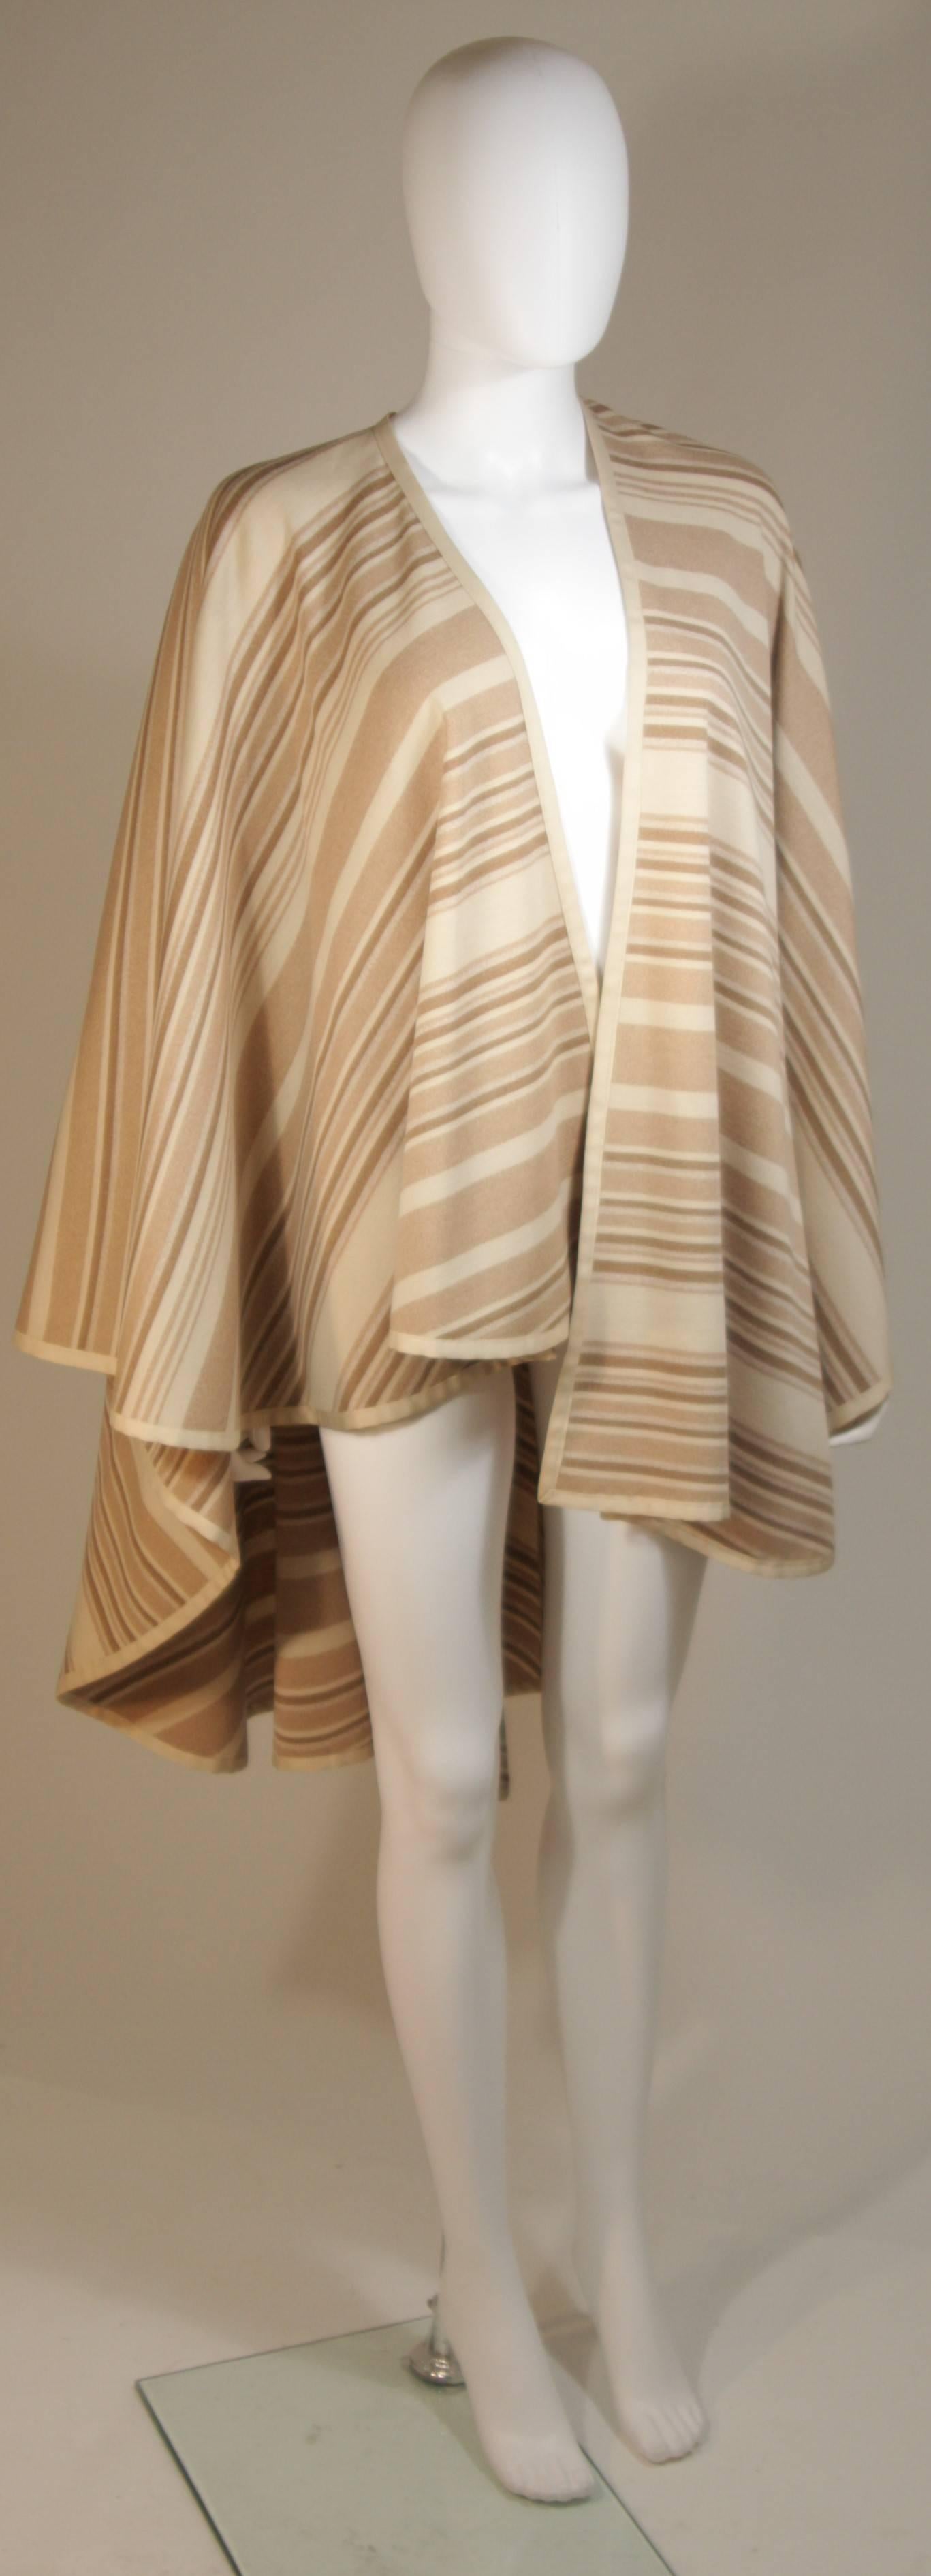 Custom Cream & Nude Wool Cape and Skirt Ensemble Size 6-10 For Sale 3